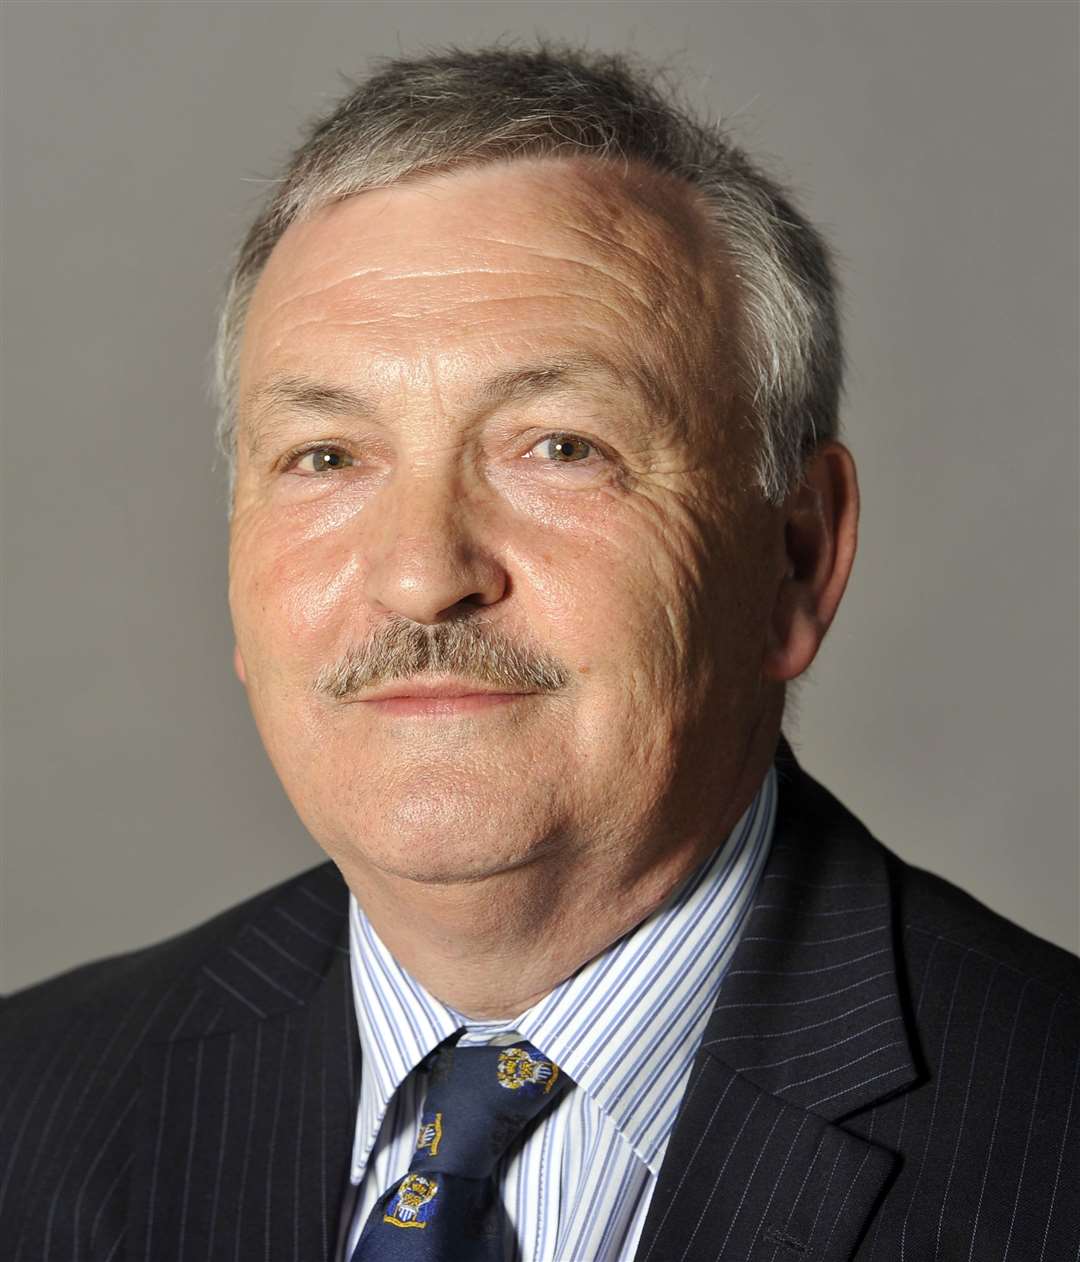 Medway Council leader Cllr Alan Jarrett has hit out at Maidstone council